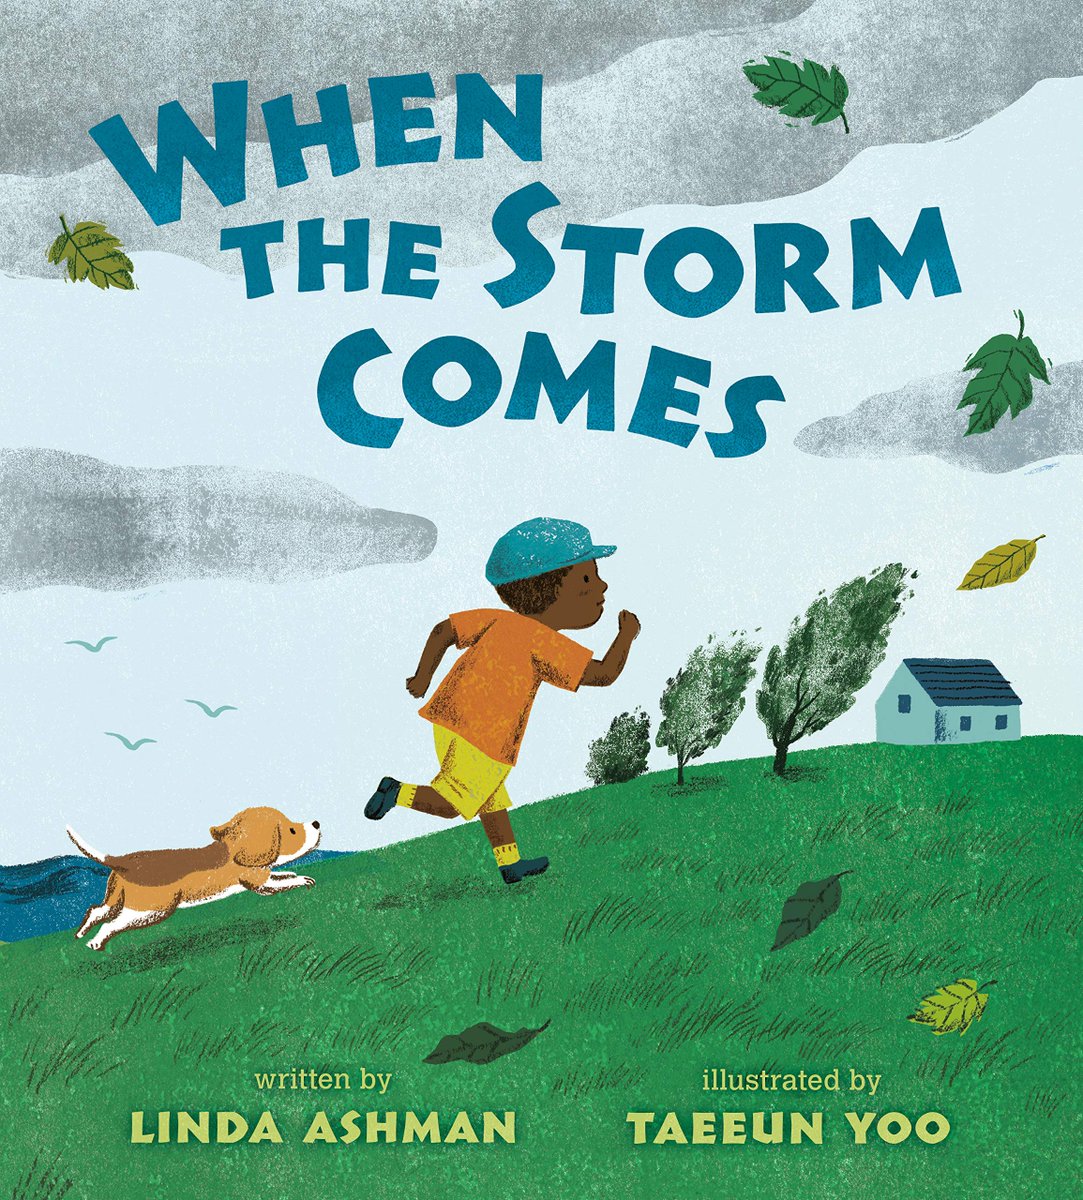 Looking for poetic picture books to celebrate #NationalPoetryMonth? We recommend this list of lyrical stories compiled by @readbrightly! ow.ly/eoWO50Rb0Ha

#RORGNY #earlyliteracy #readtogether